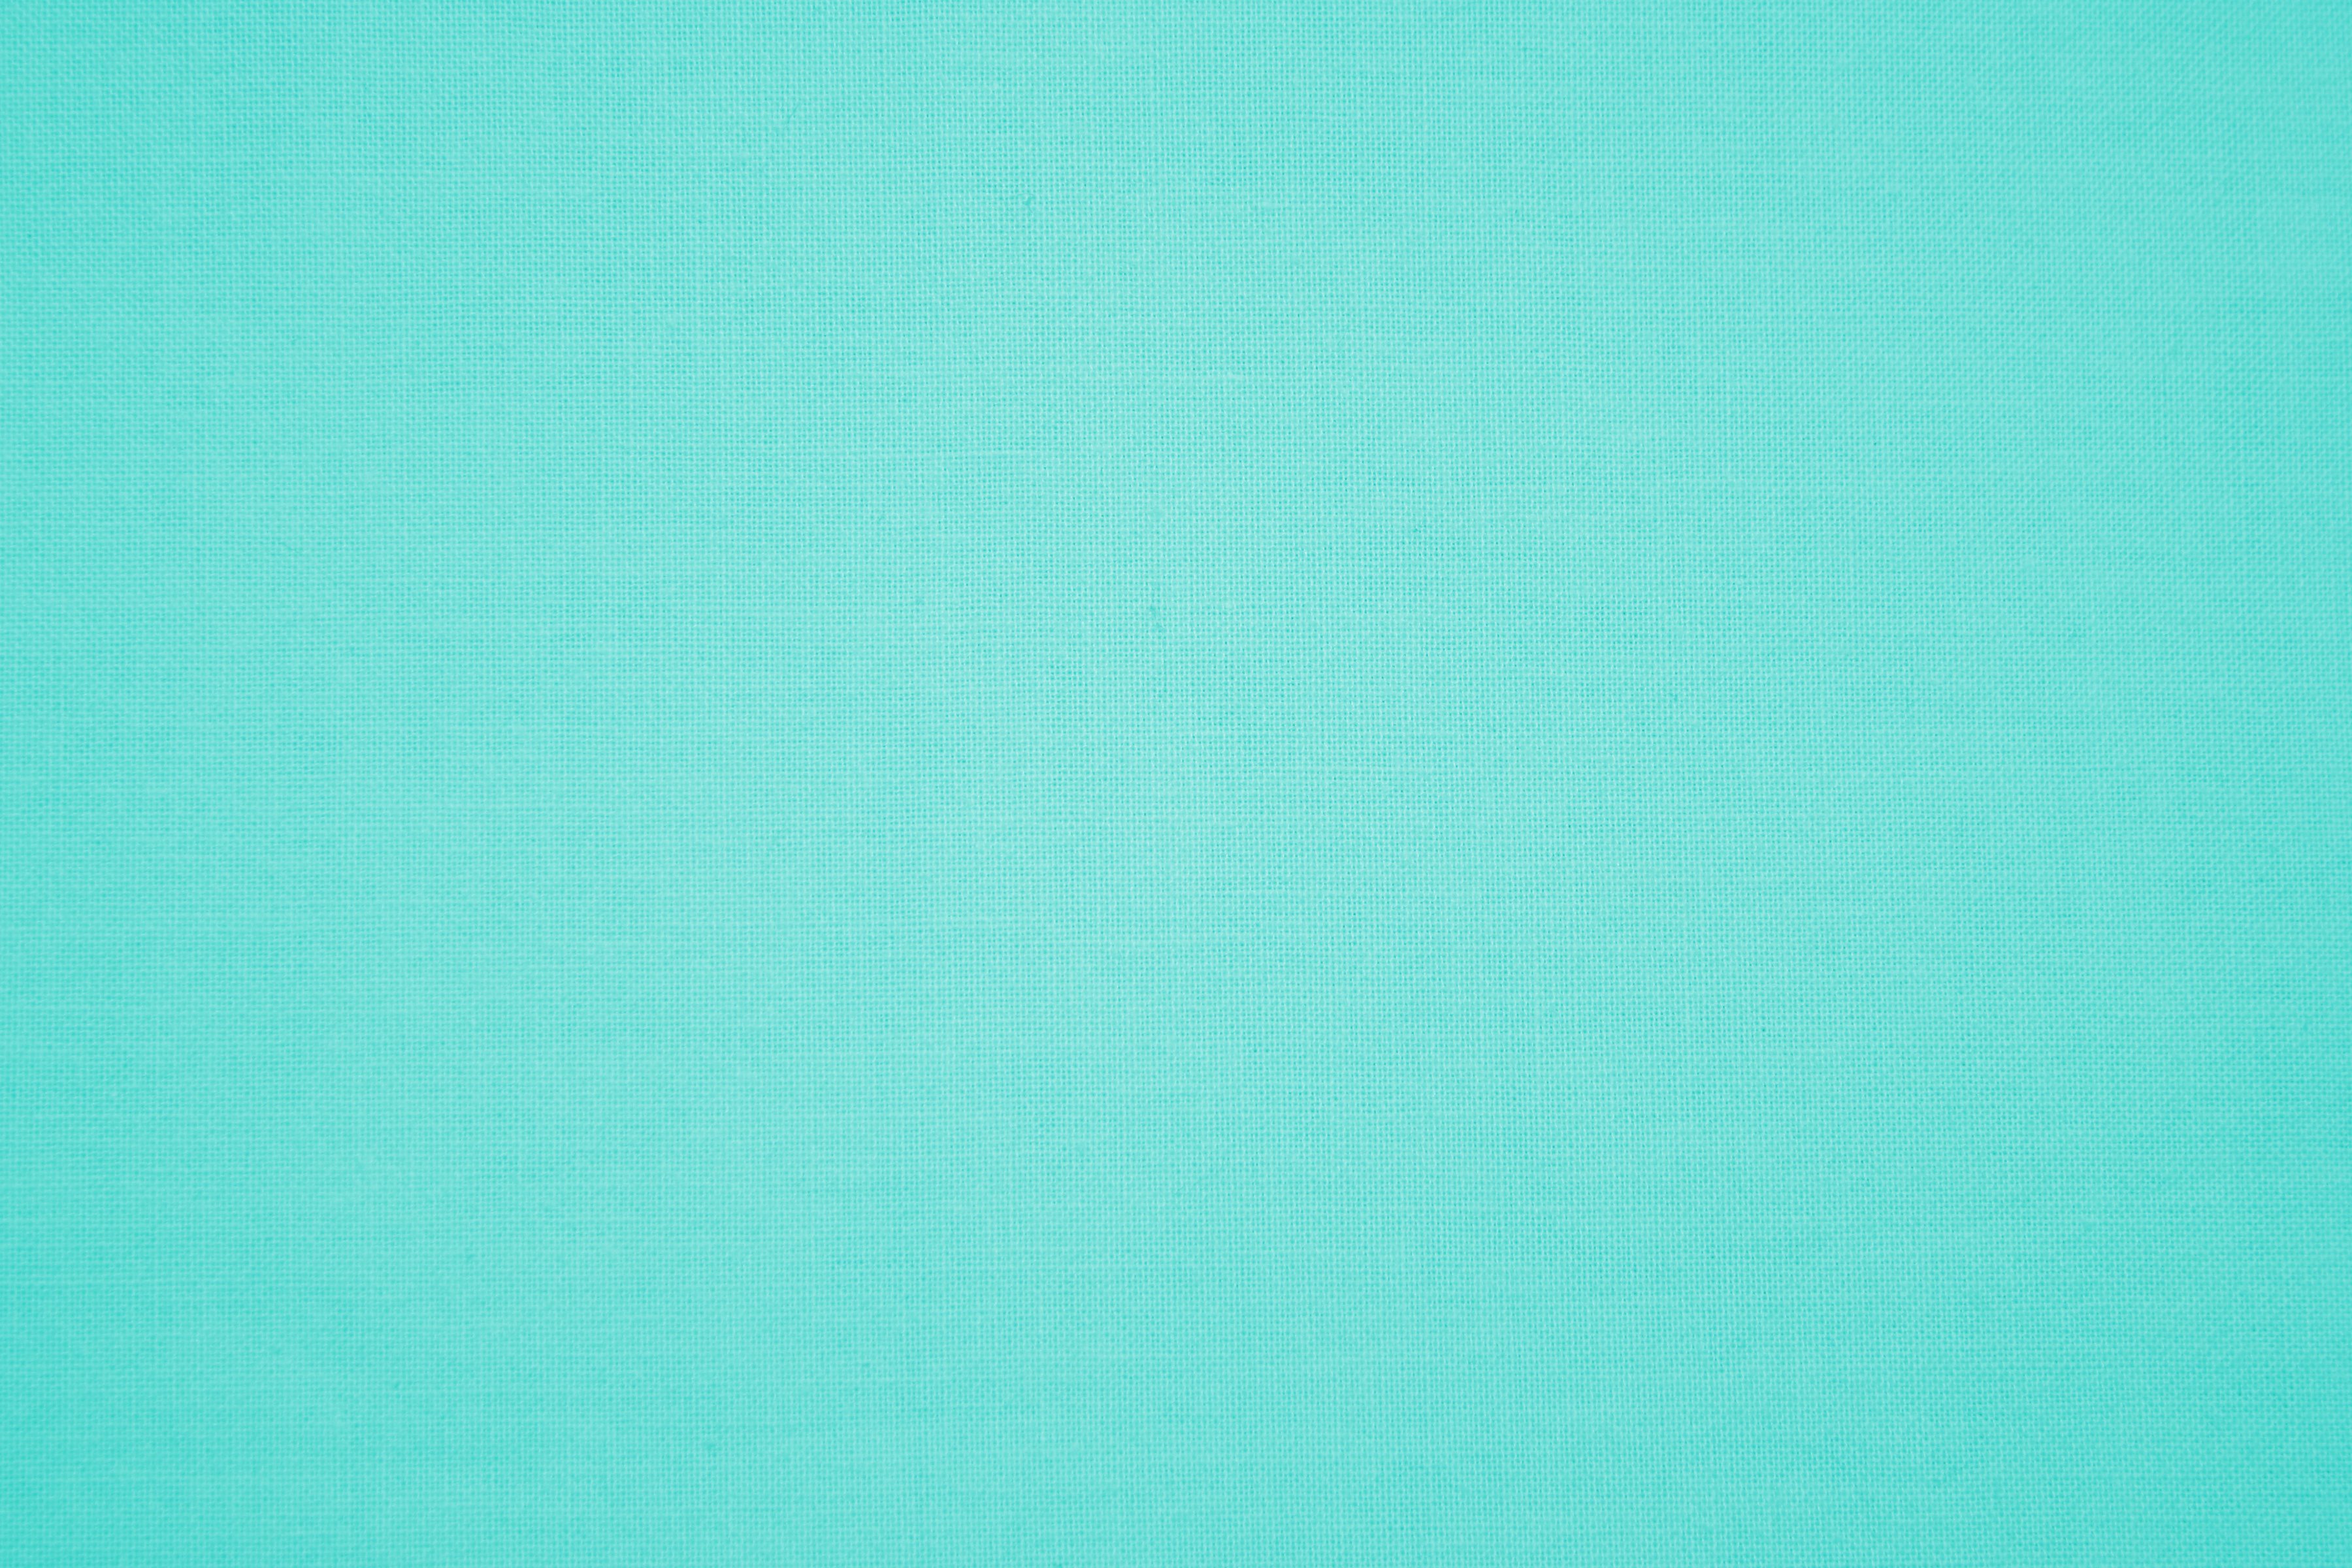 Turquoise Colored Canvas Fabric Texture Picture | Free Photograph